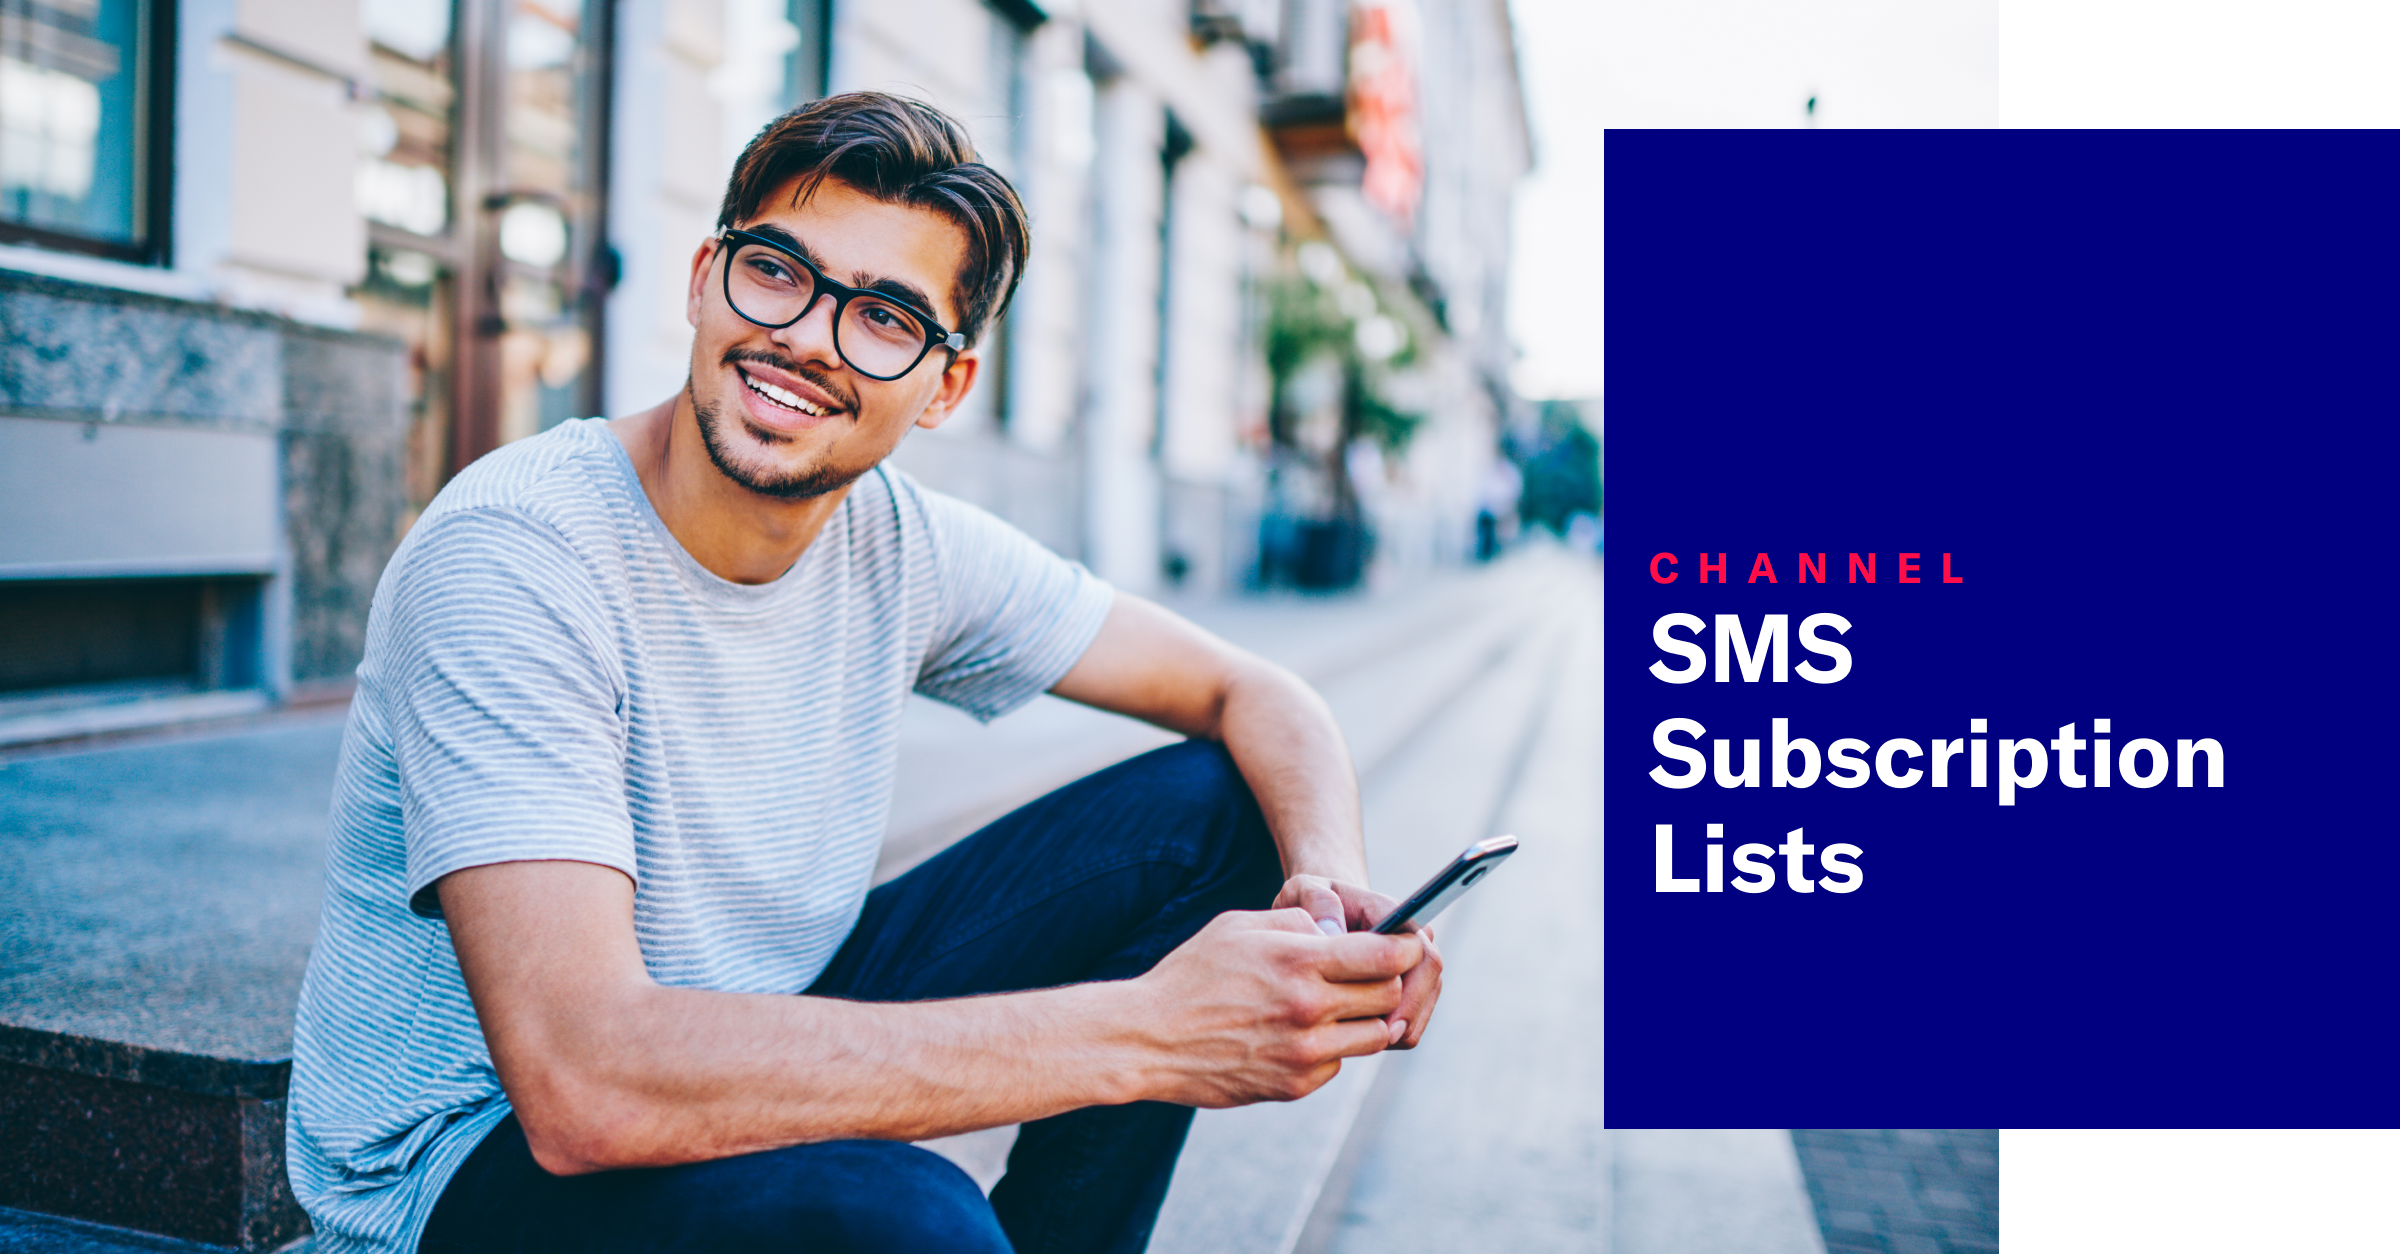 Subscription Lists for SMS